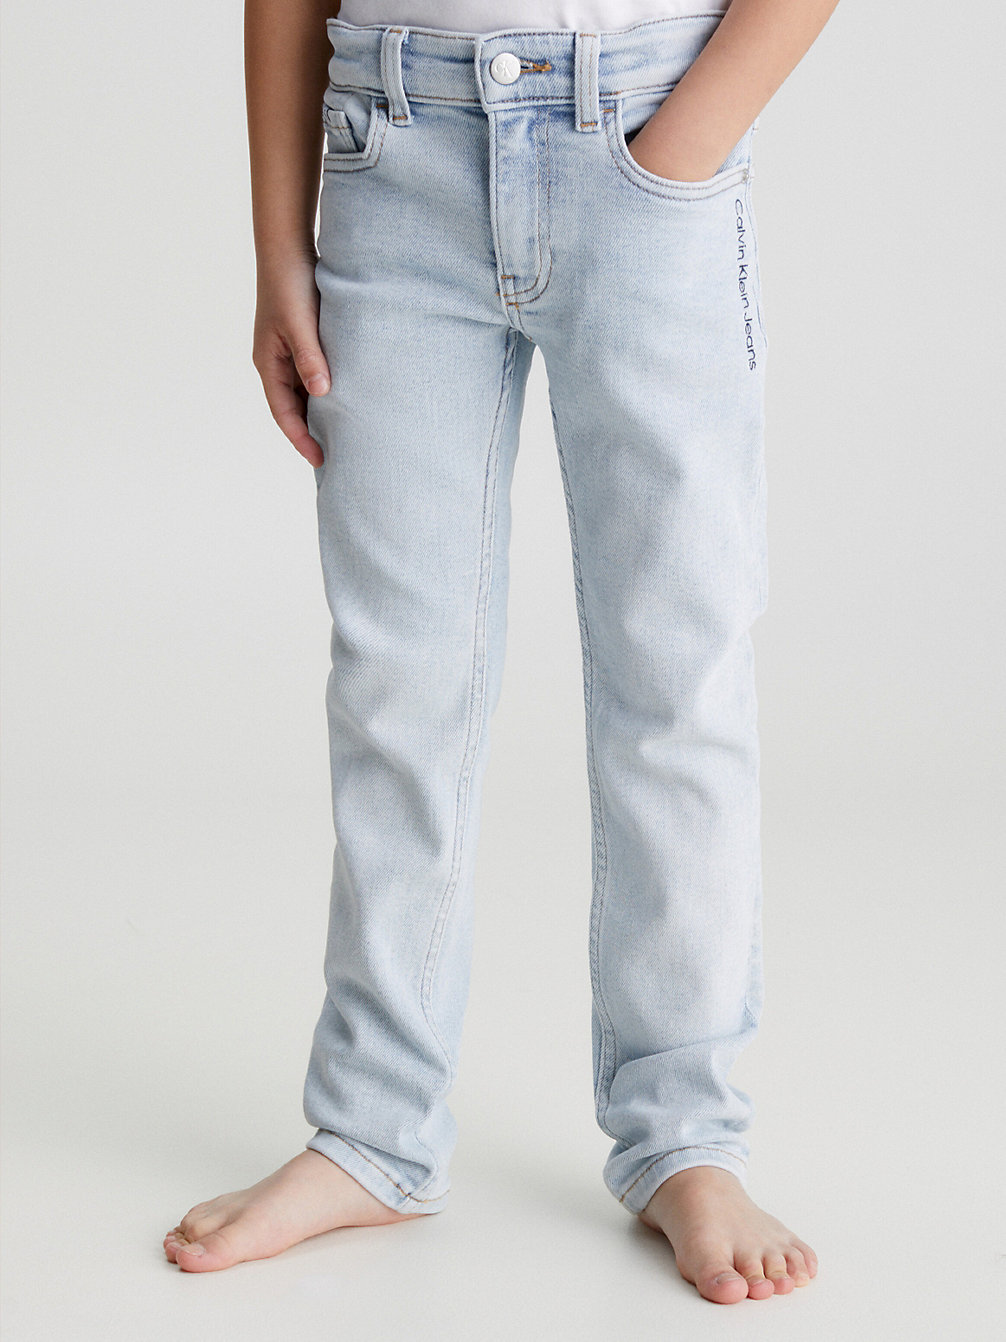 Mid Rise Slim Jeans > LIGHT BLEACHED STRETCH > undefined nino > Calvin Klein